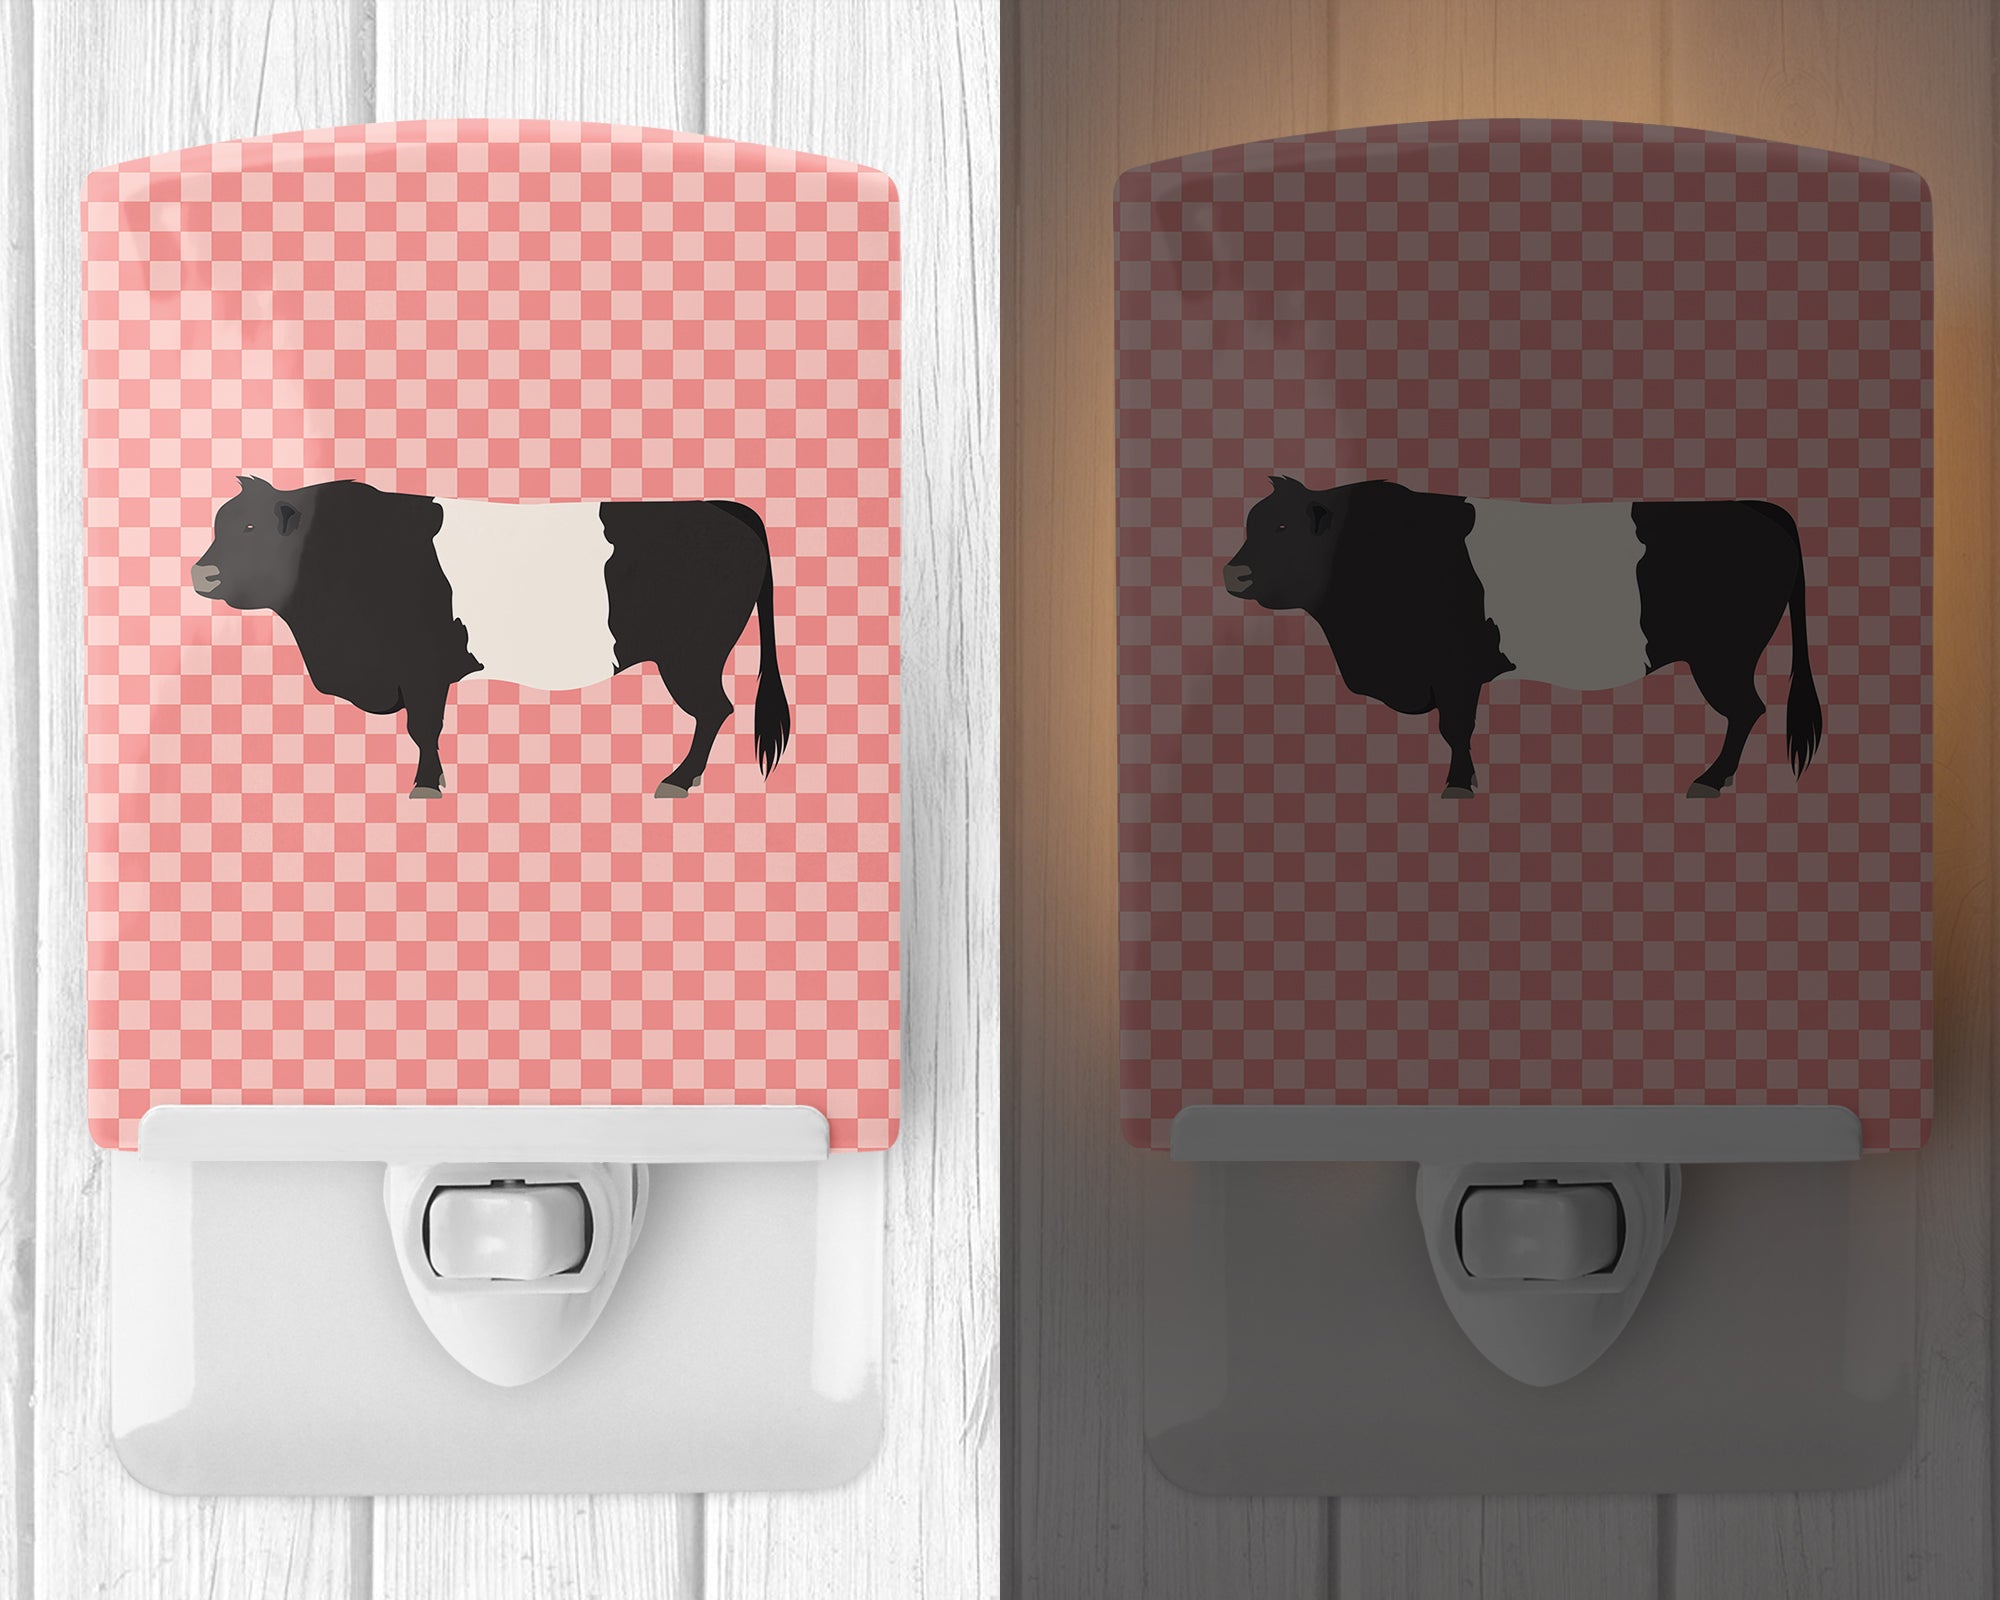 Belted Galloway Cow Pink Check Ceramic Night Light BB7831CNL - the-store.com